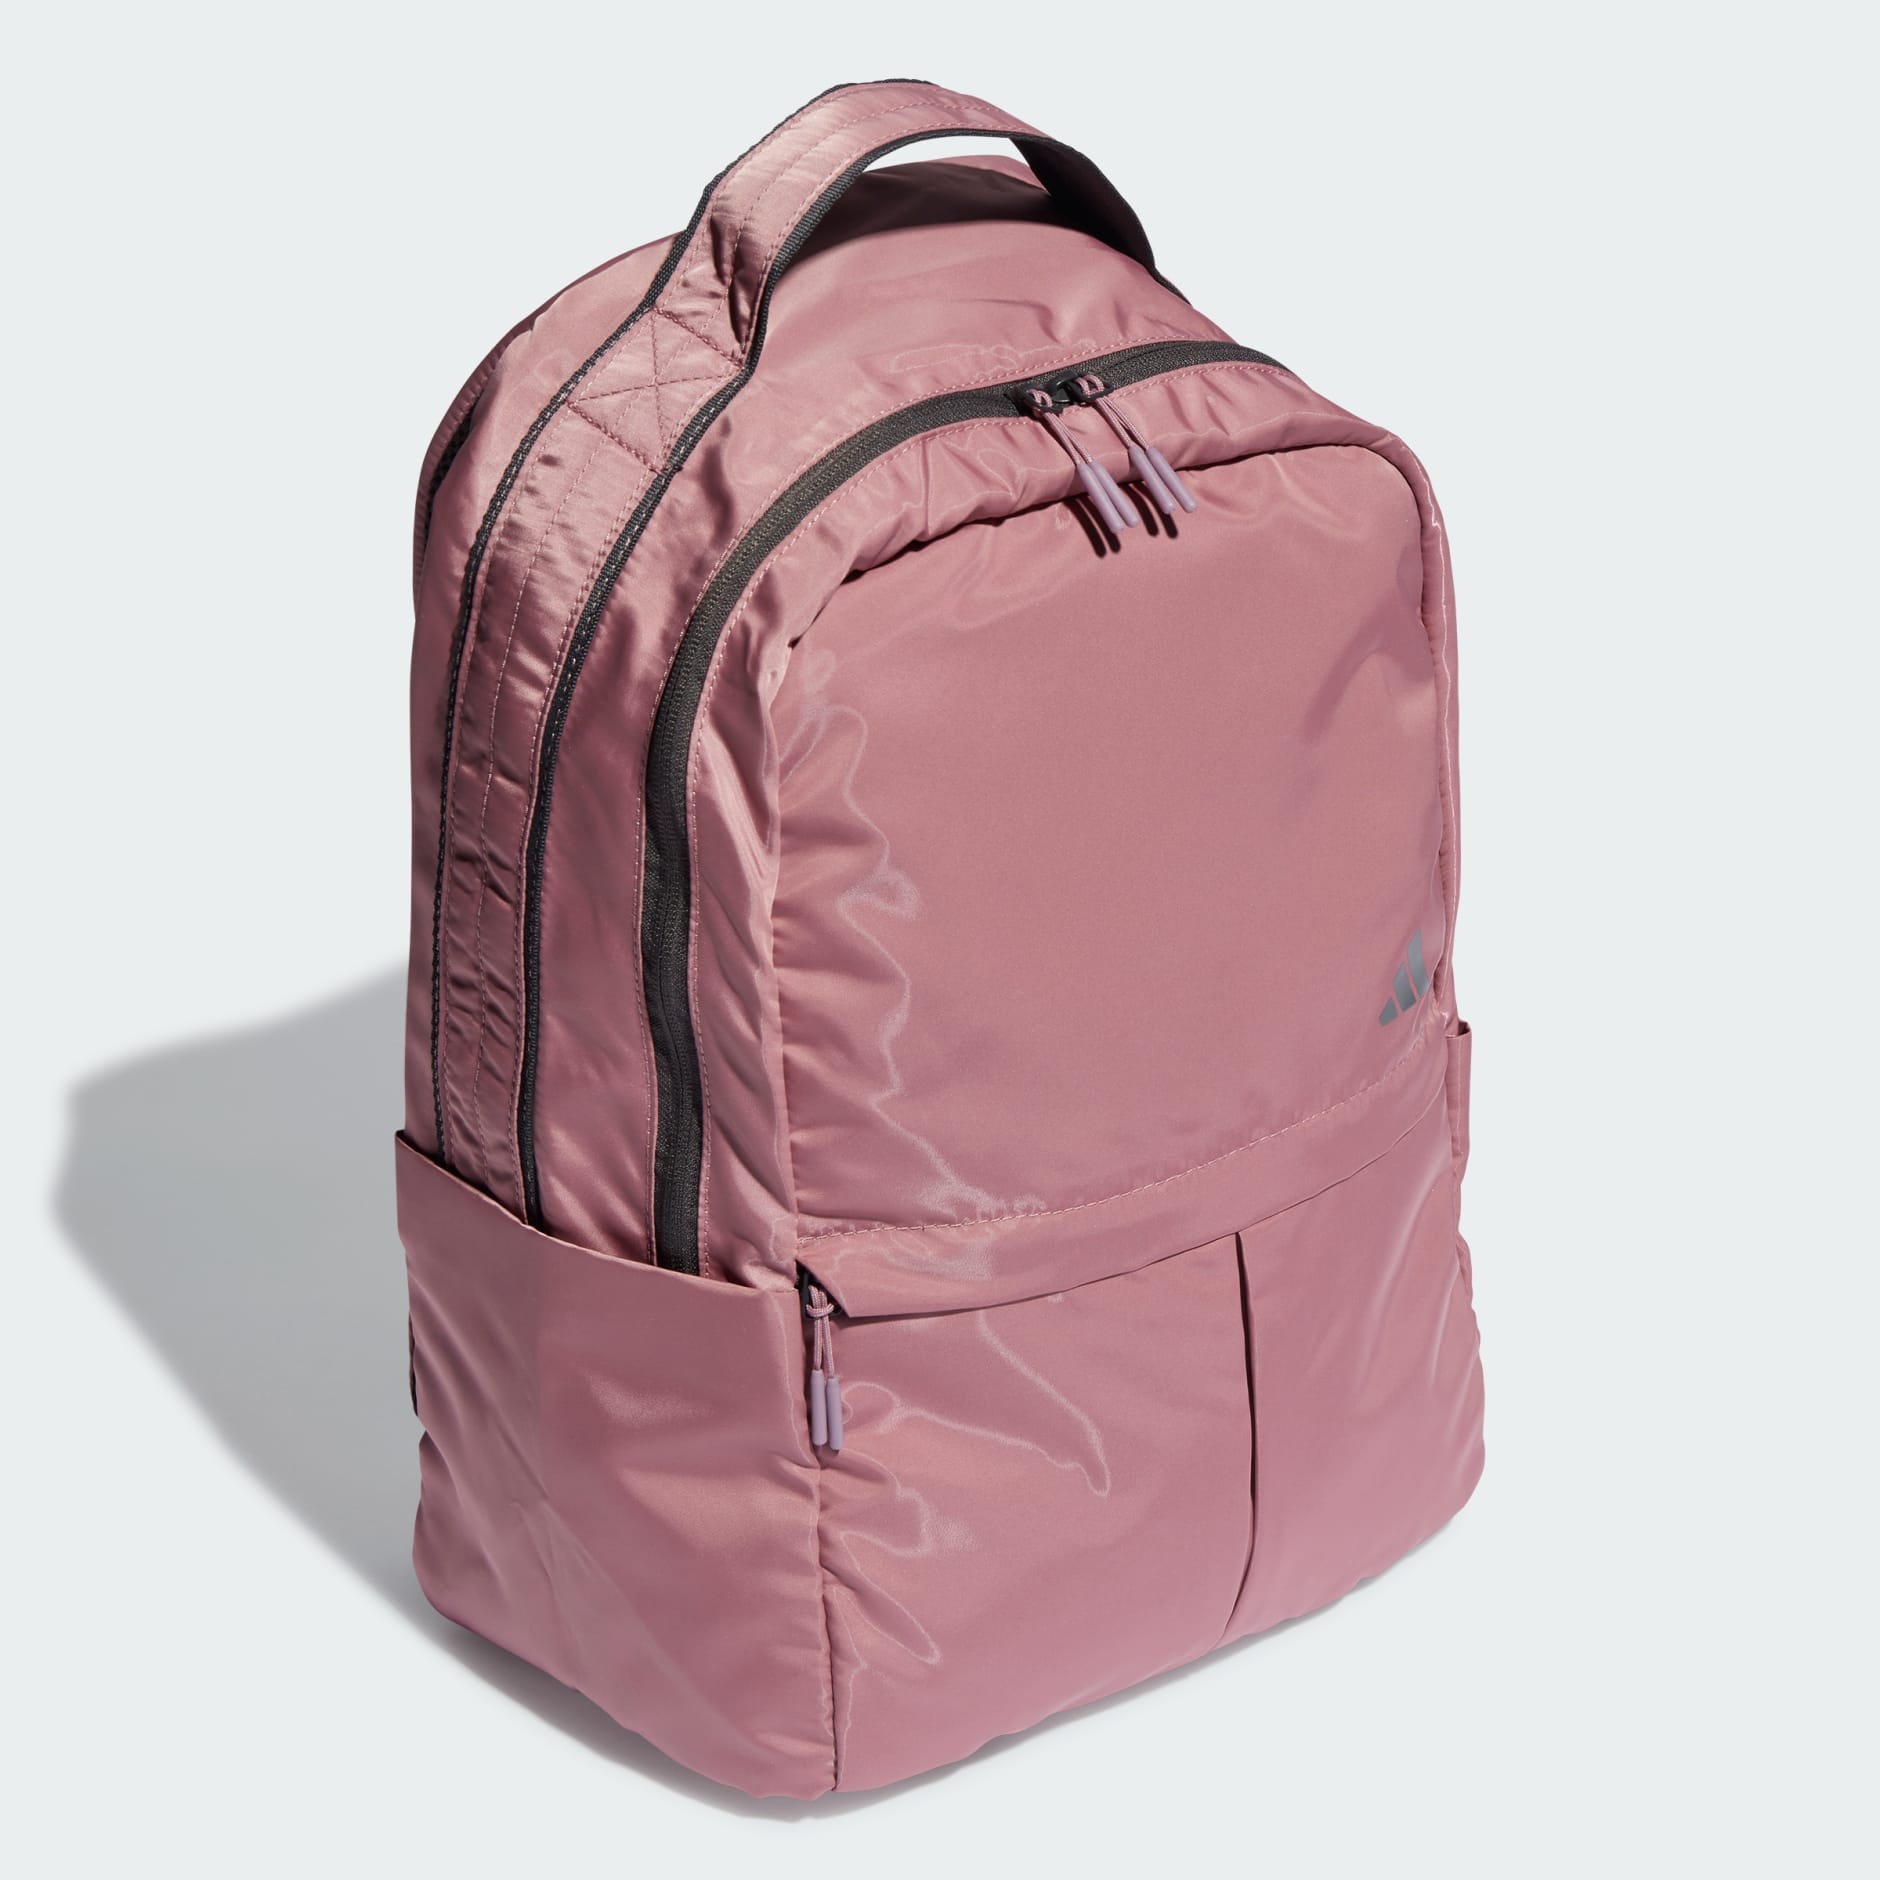 Women's Accessories - Yoga Backpack - Pink